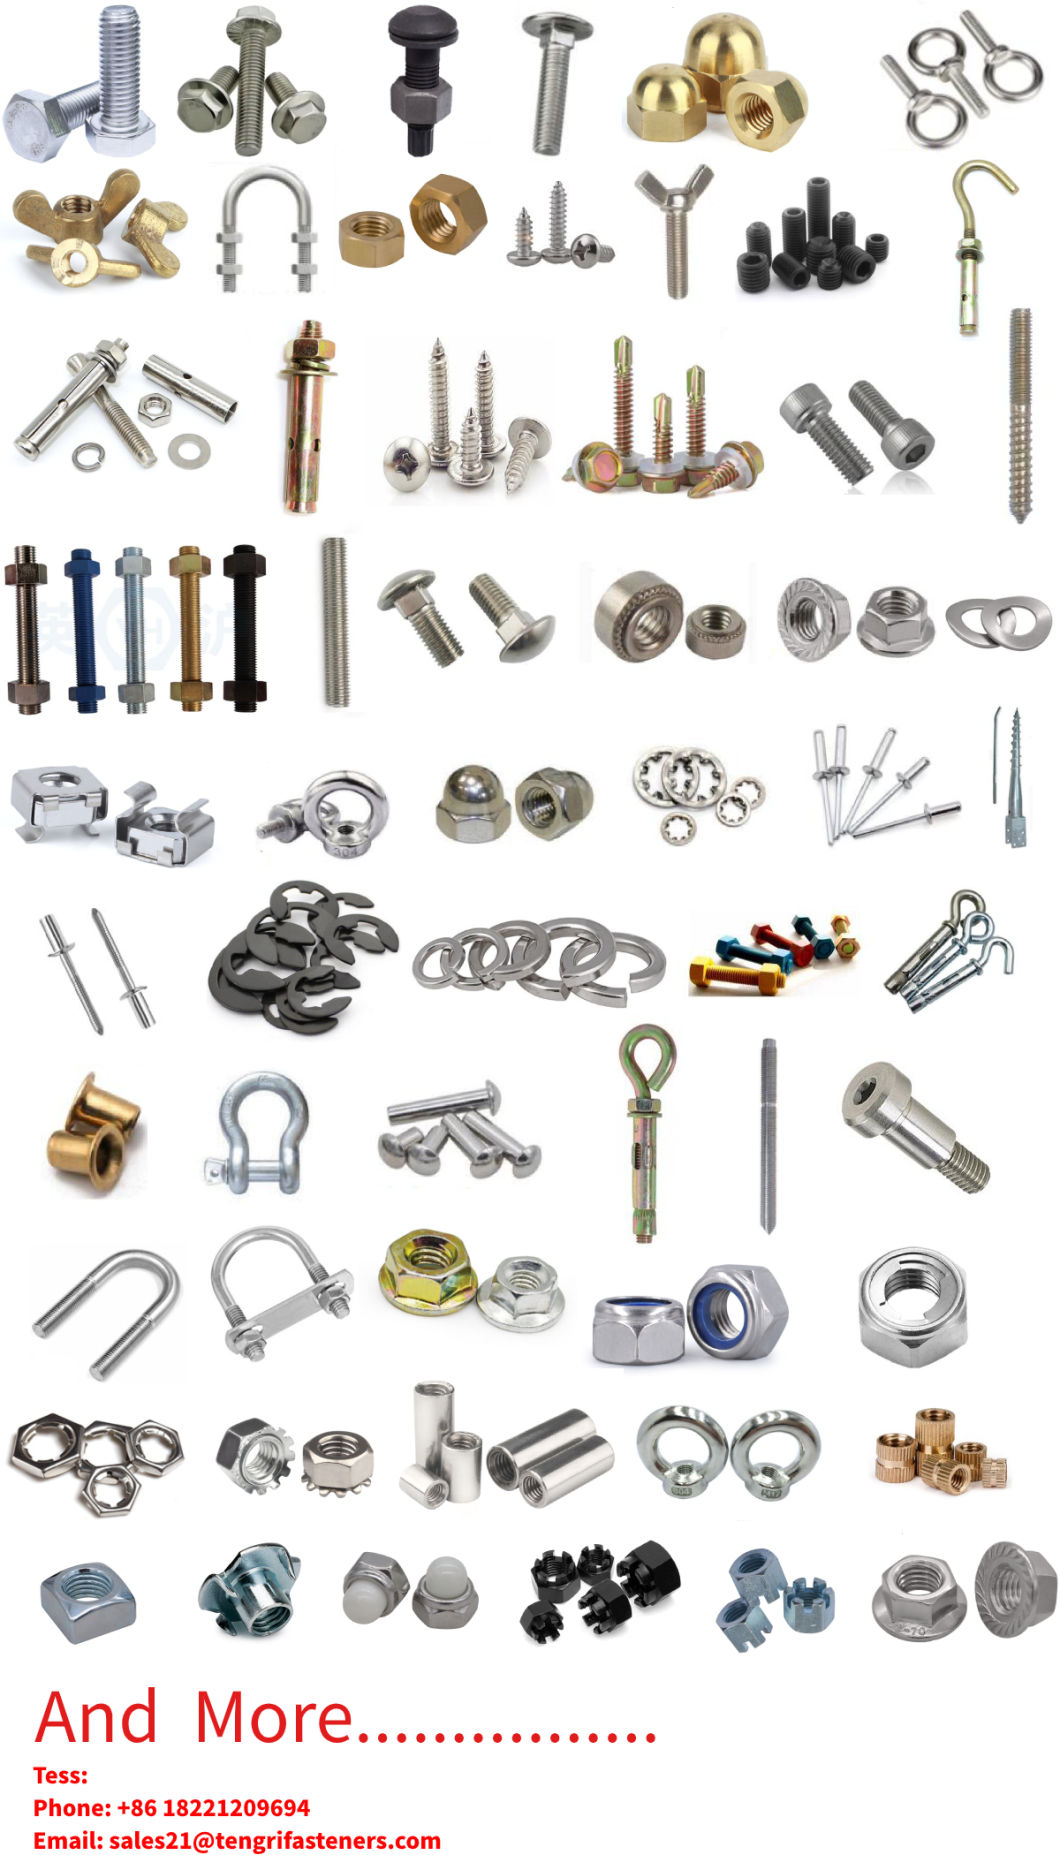 Top Class Fastener Supplier Located in Shanghai